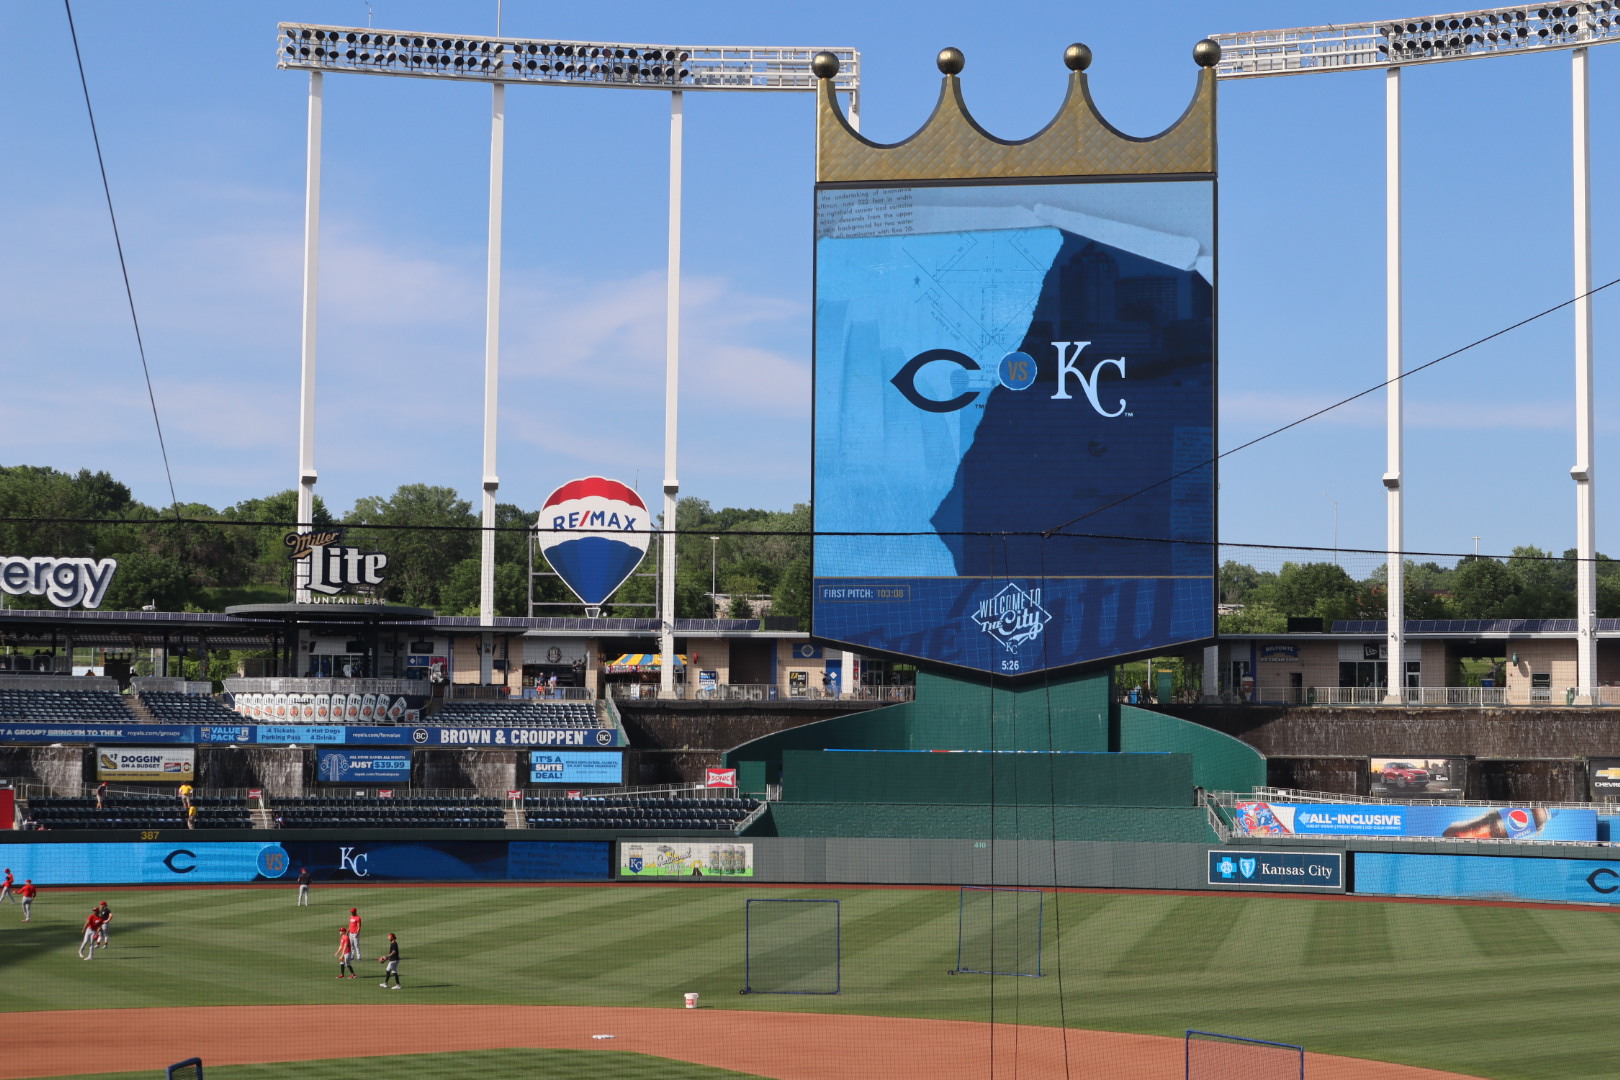 Chiefs Night at the K was a rare opportunity for dual celebration